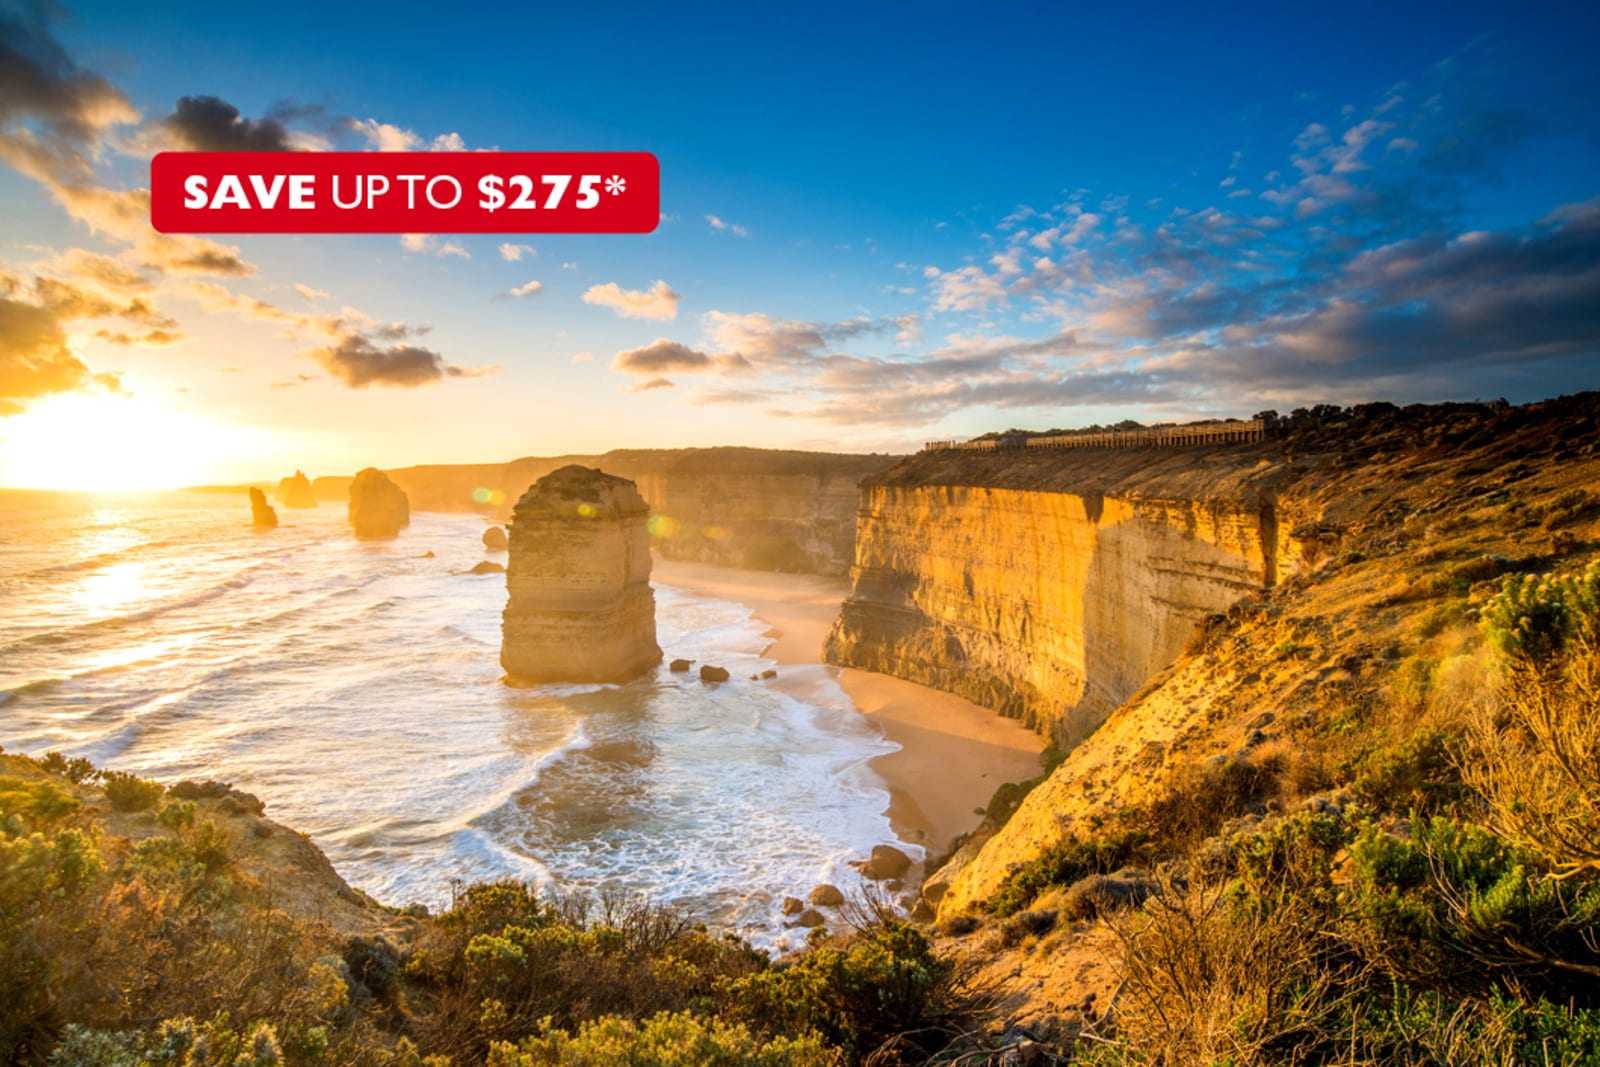 The Twelve Apostles is one of the most popular attractions on Australia's Great Ocean Road